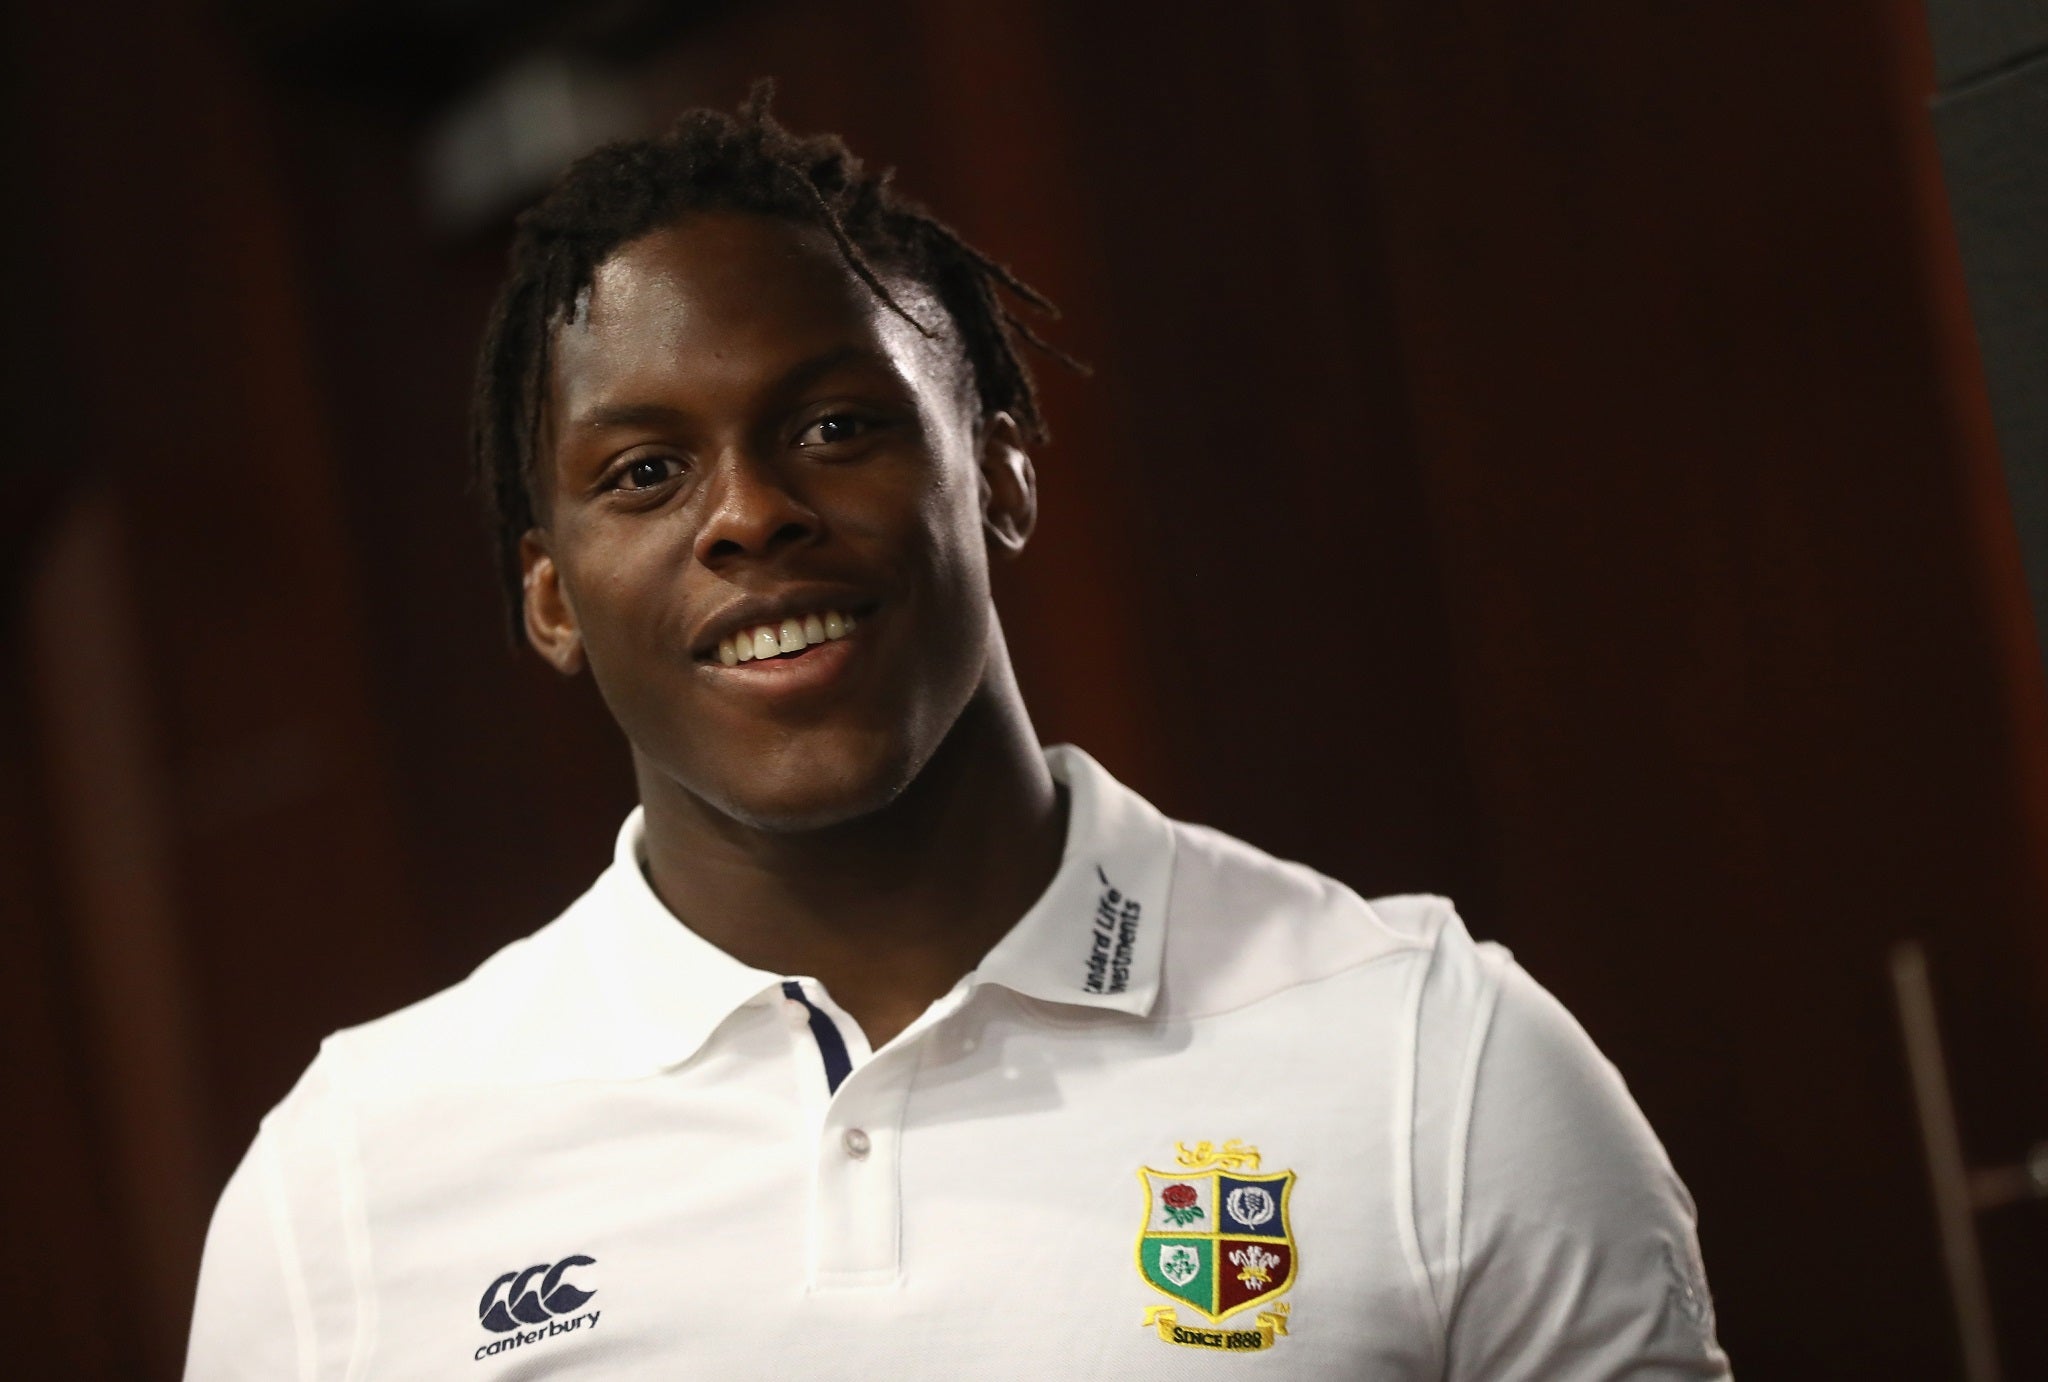 Maro Itoje will make his first appearance for the British and Irish Lions against the Blues